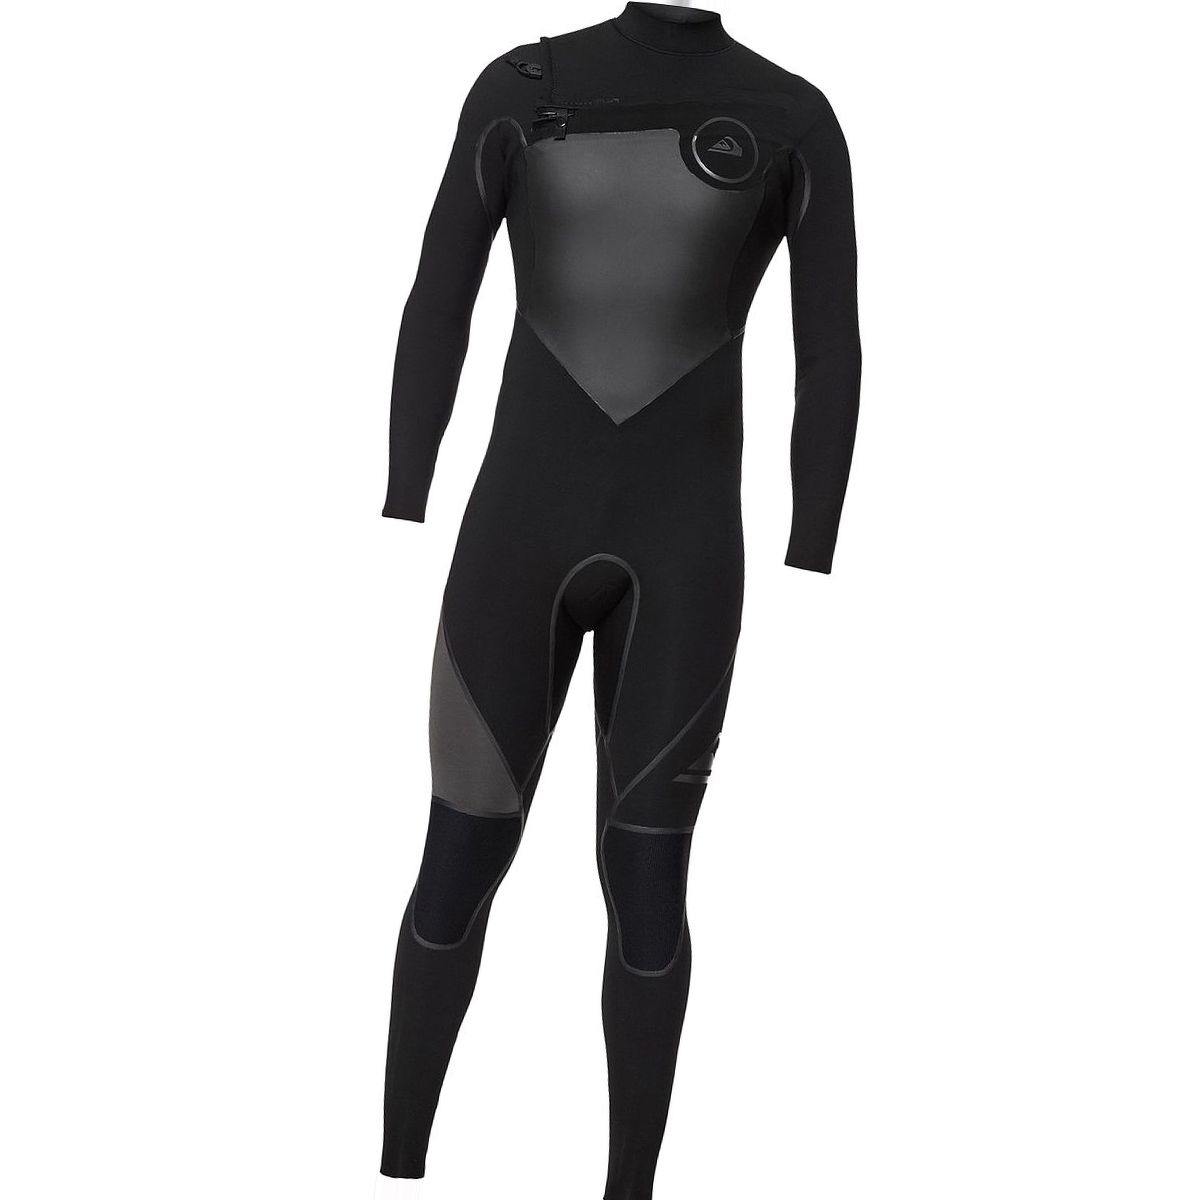 Medeium/Large Shorty Wetsuit Front Zip Style Closeout Priced Men's 8809 